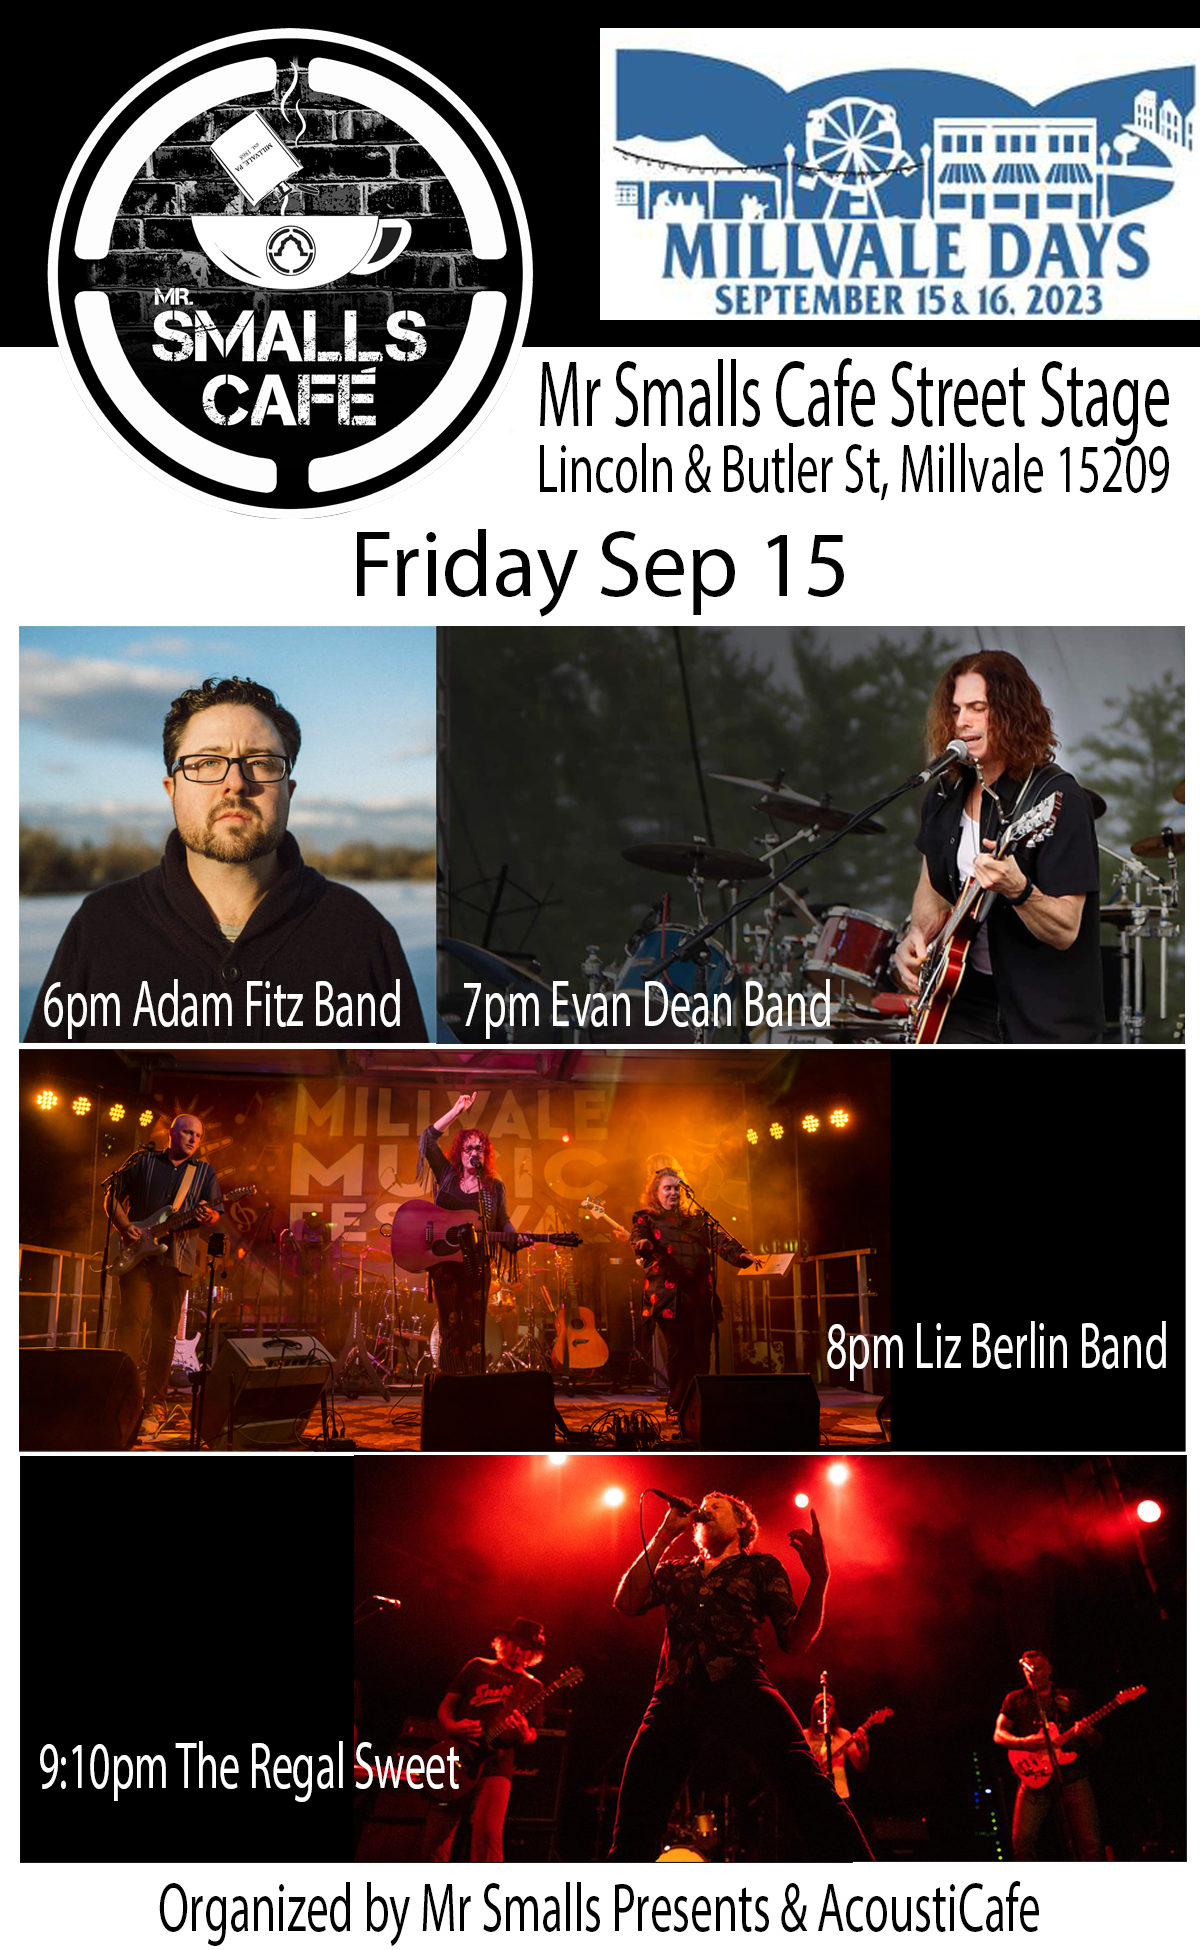 Friday Lineup of Mr Smalls Cafe Street Stage for Millvale Days 2023